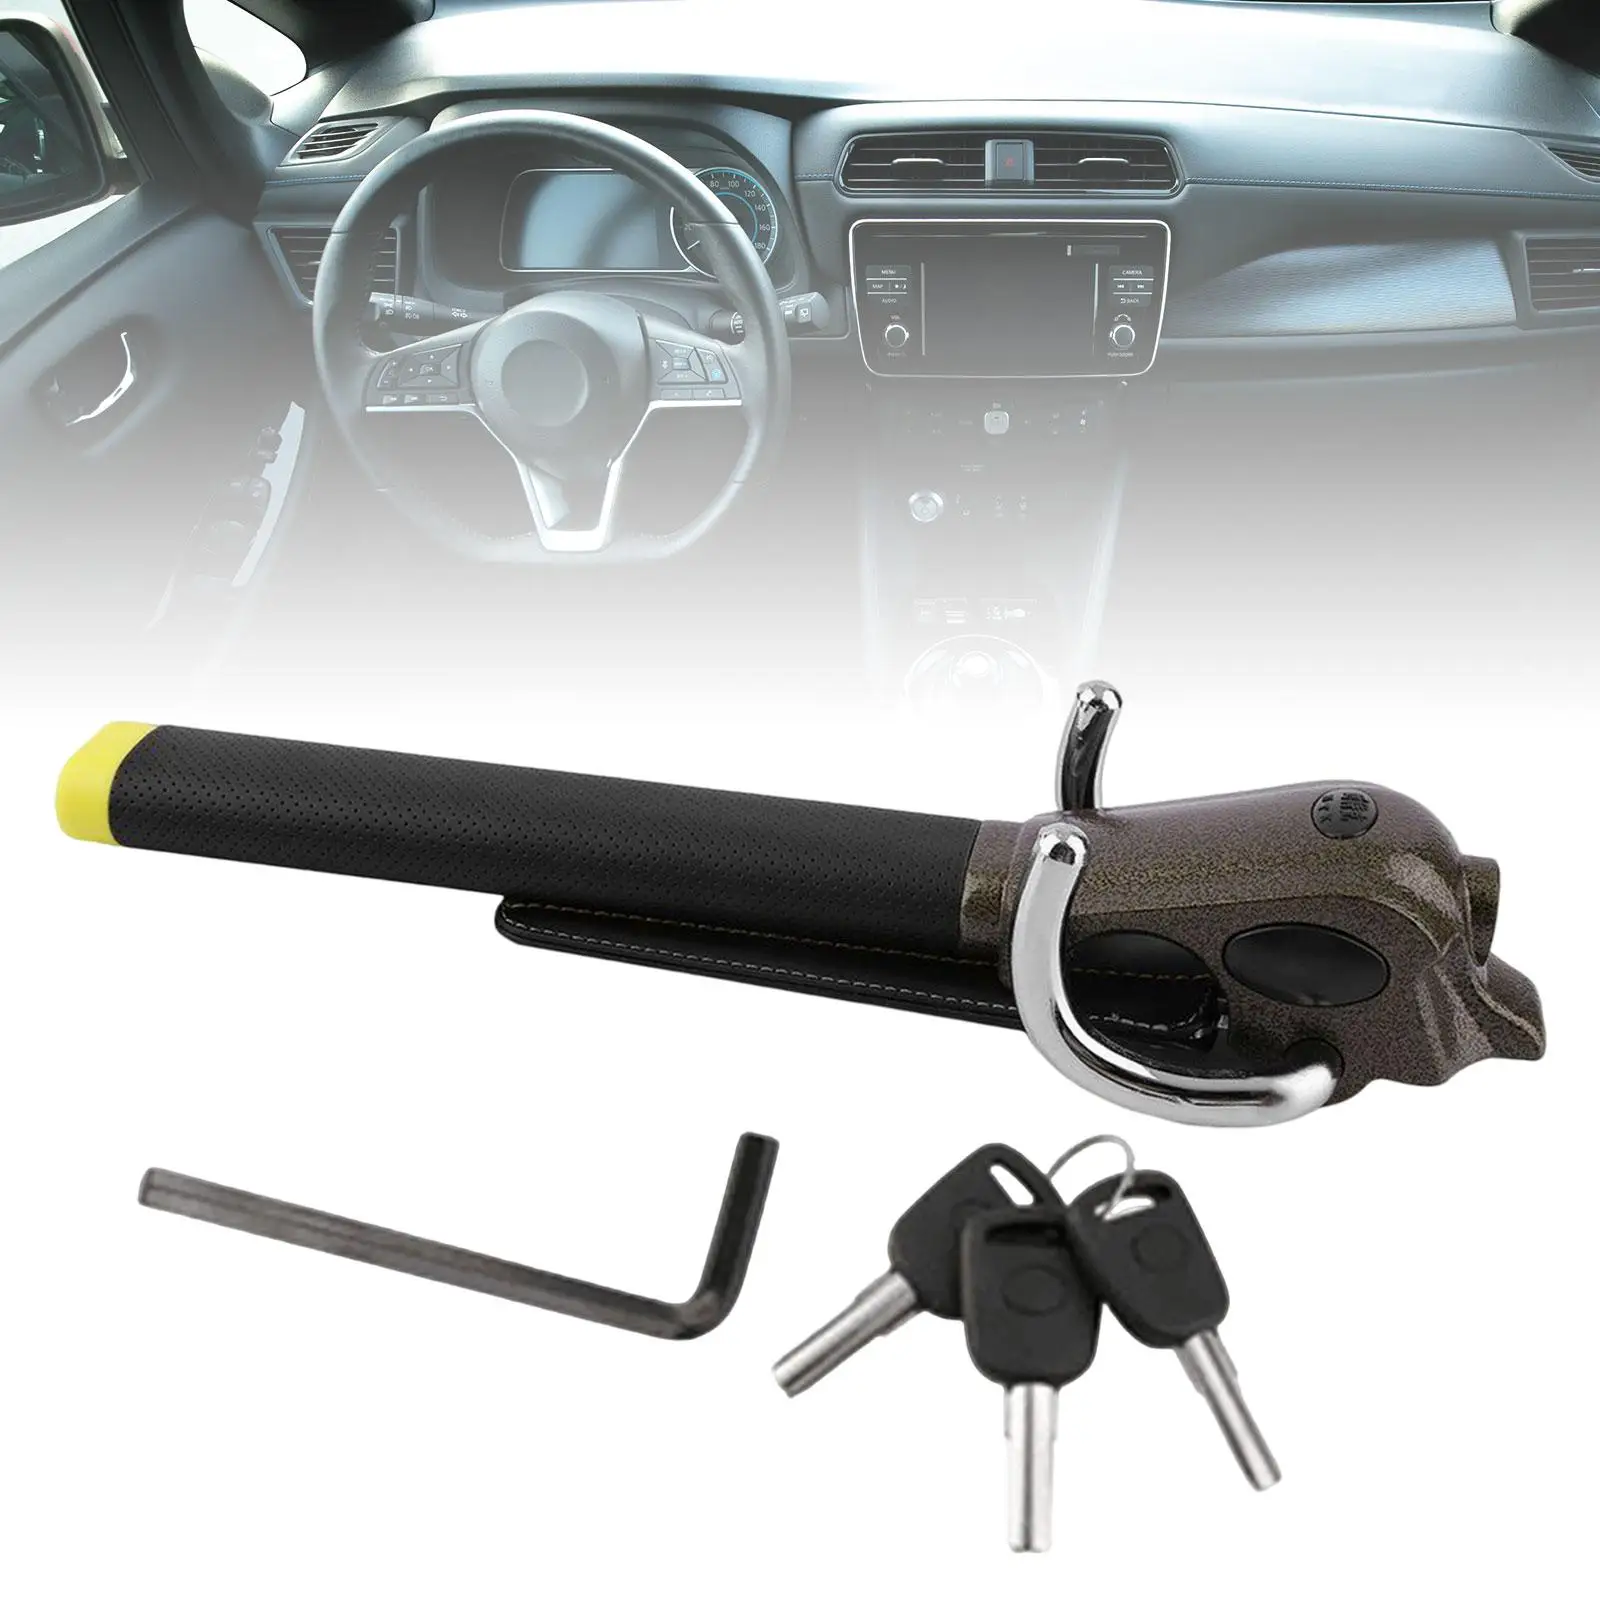 Steering Wheel Lock with 3 Keys Heavy Duty Sturdy Automotive Convenient Vehicles Lock Accessories for SUV Van Vehicles Cars